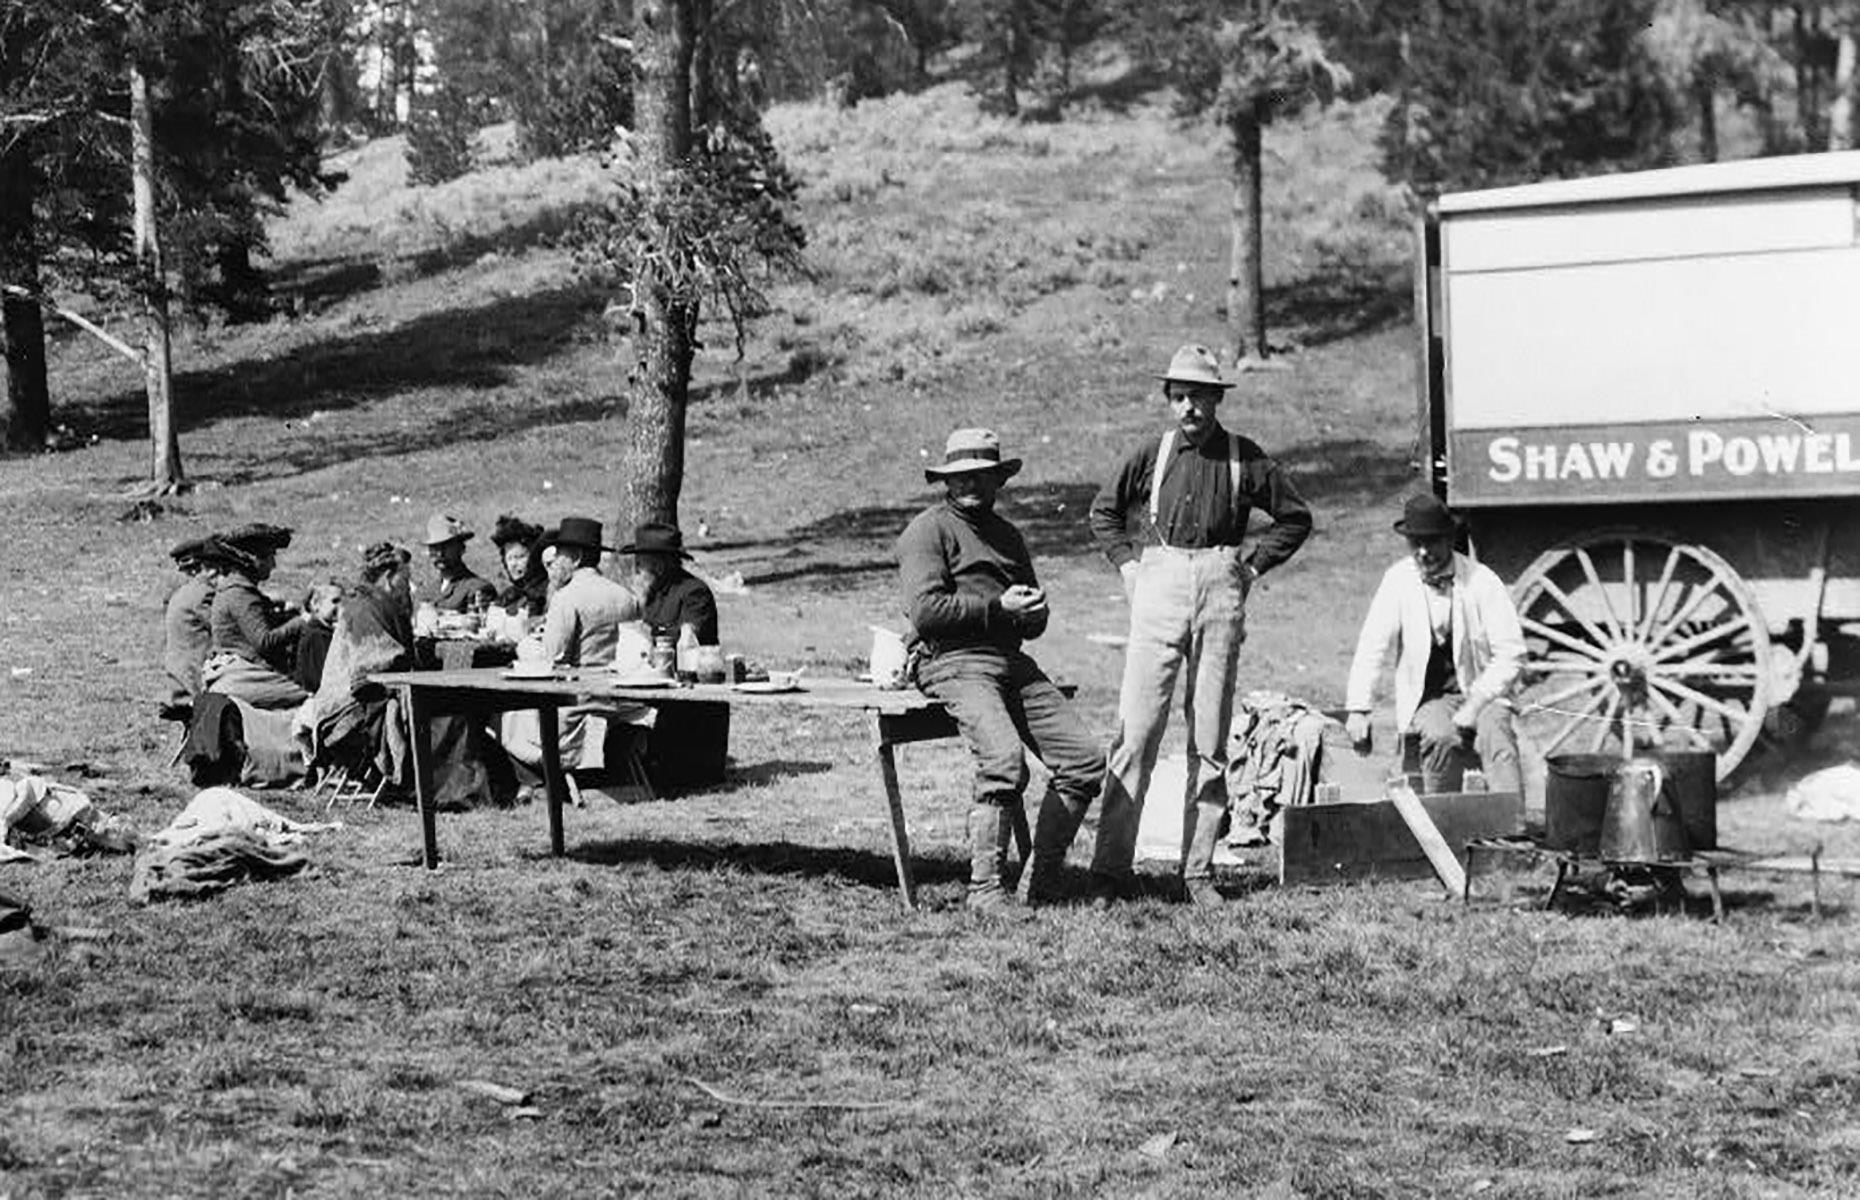 In the park's earliest decades, private automobiles were prohibited too. Instead, tourists explored the park in their own horse-drawn wagons or on stagecoach tours led by guides. Here a group of travelers and guides picnic beside their vehicle, in a clearing at the edge of a forest.